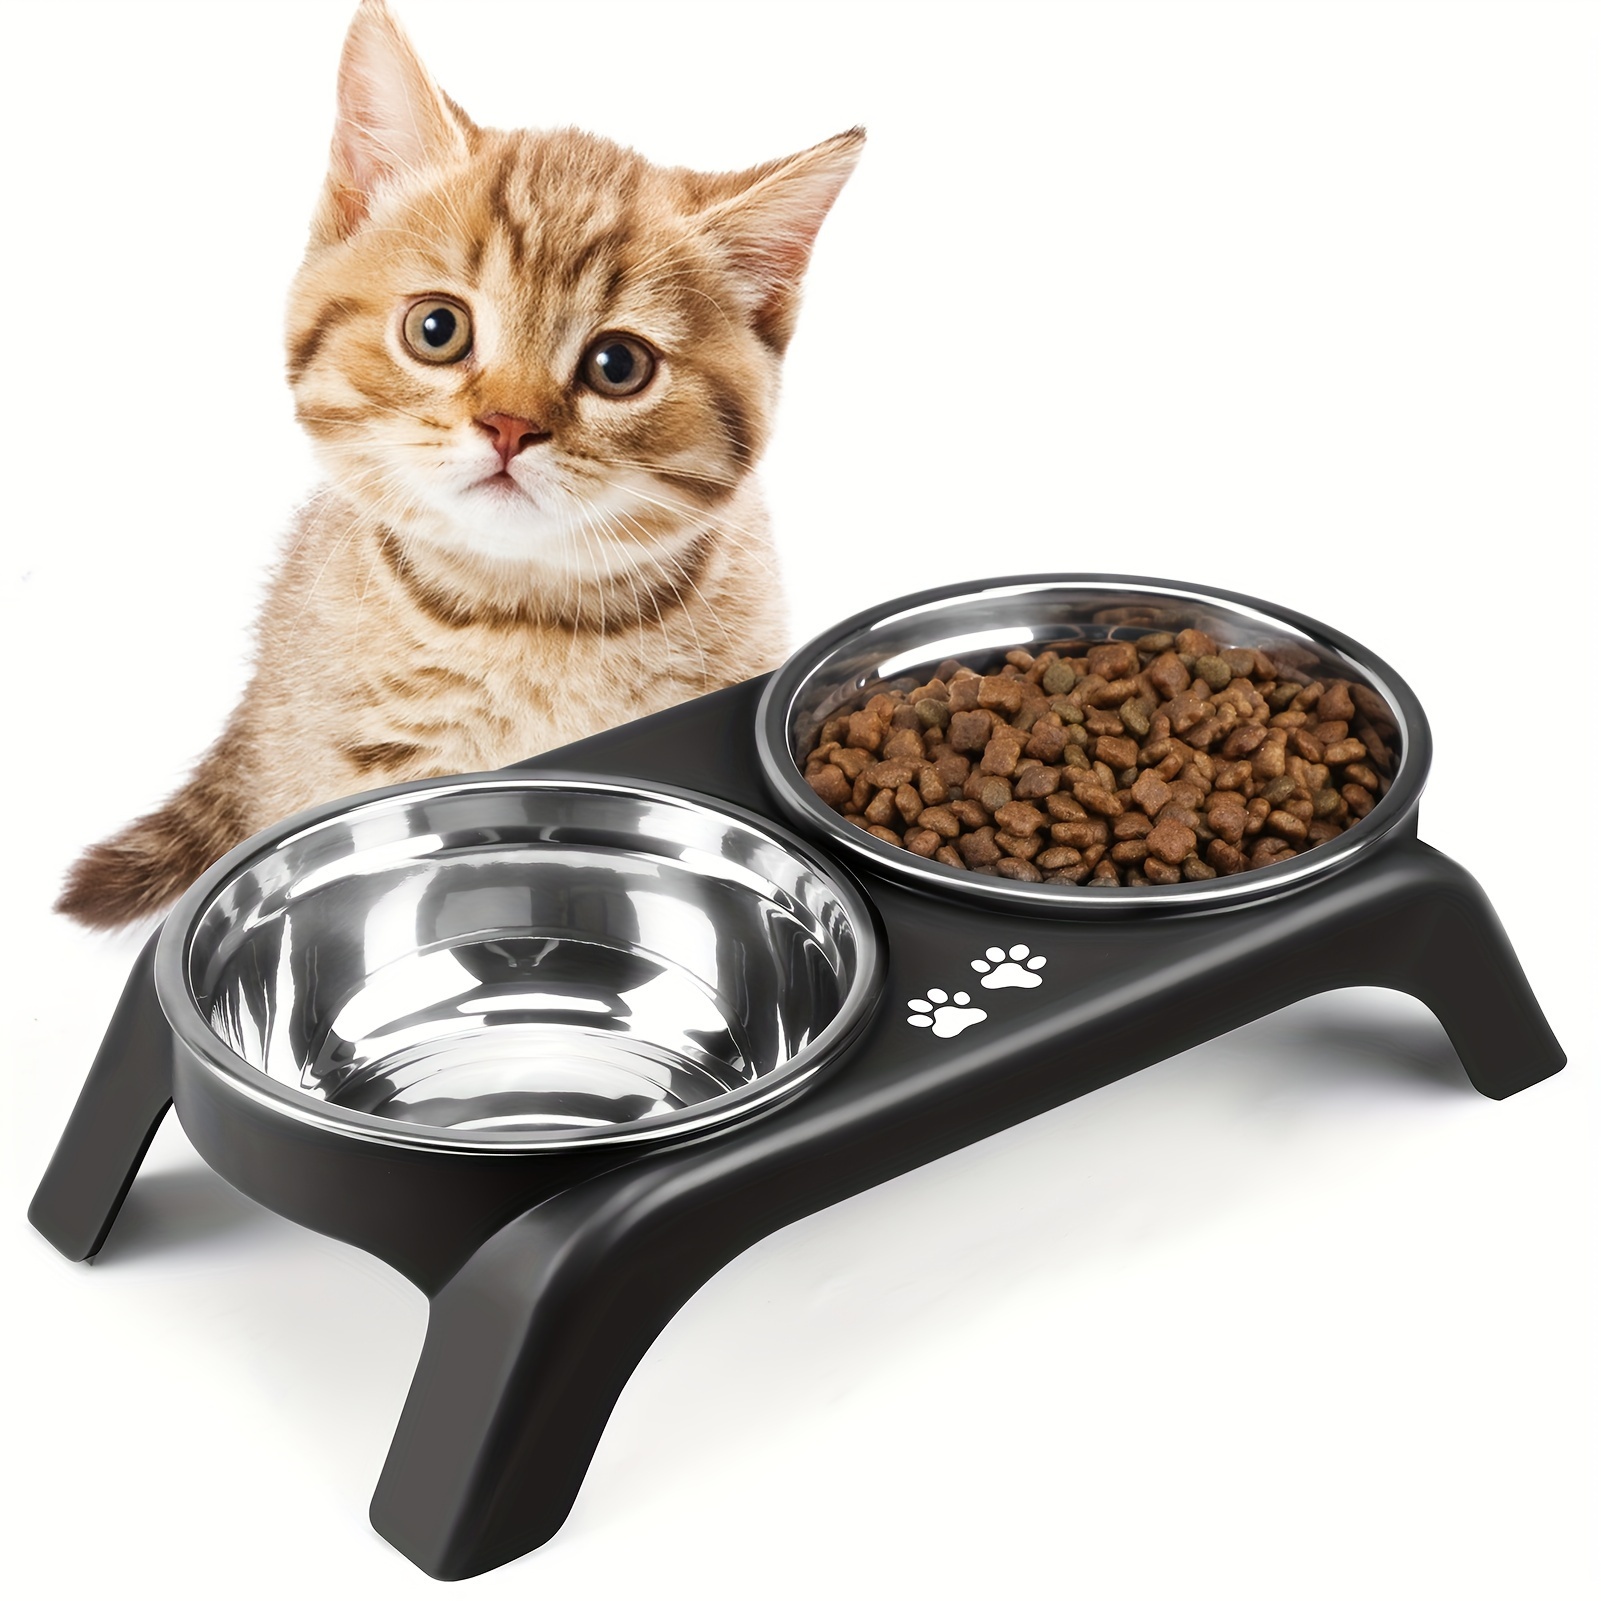 

Elevated Stainless Steel Cat Bowls With Non-slip Feet - Anti-vomiting, Easy Clean Design For Indoor Cats & Small Dogs Pet Bowls For Cats Elevated Cat Bowls Set